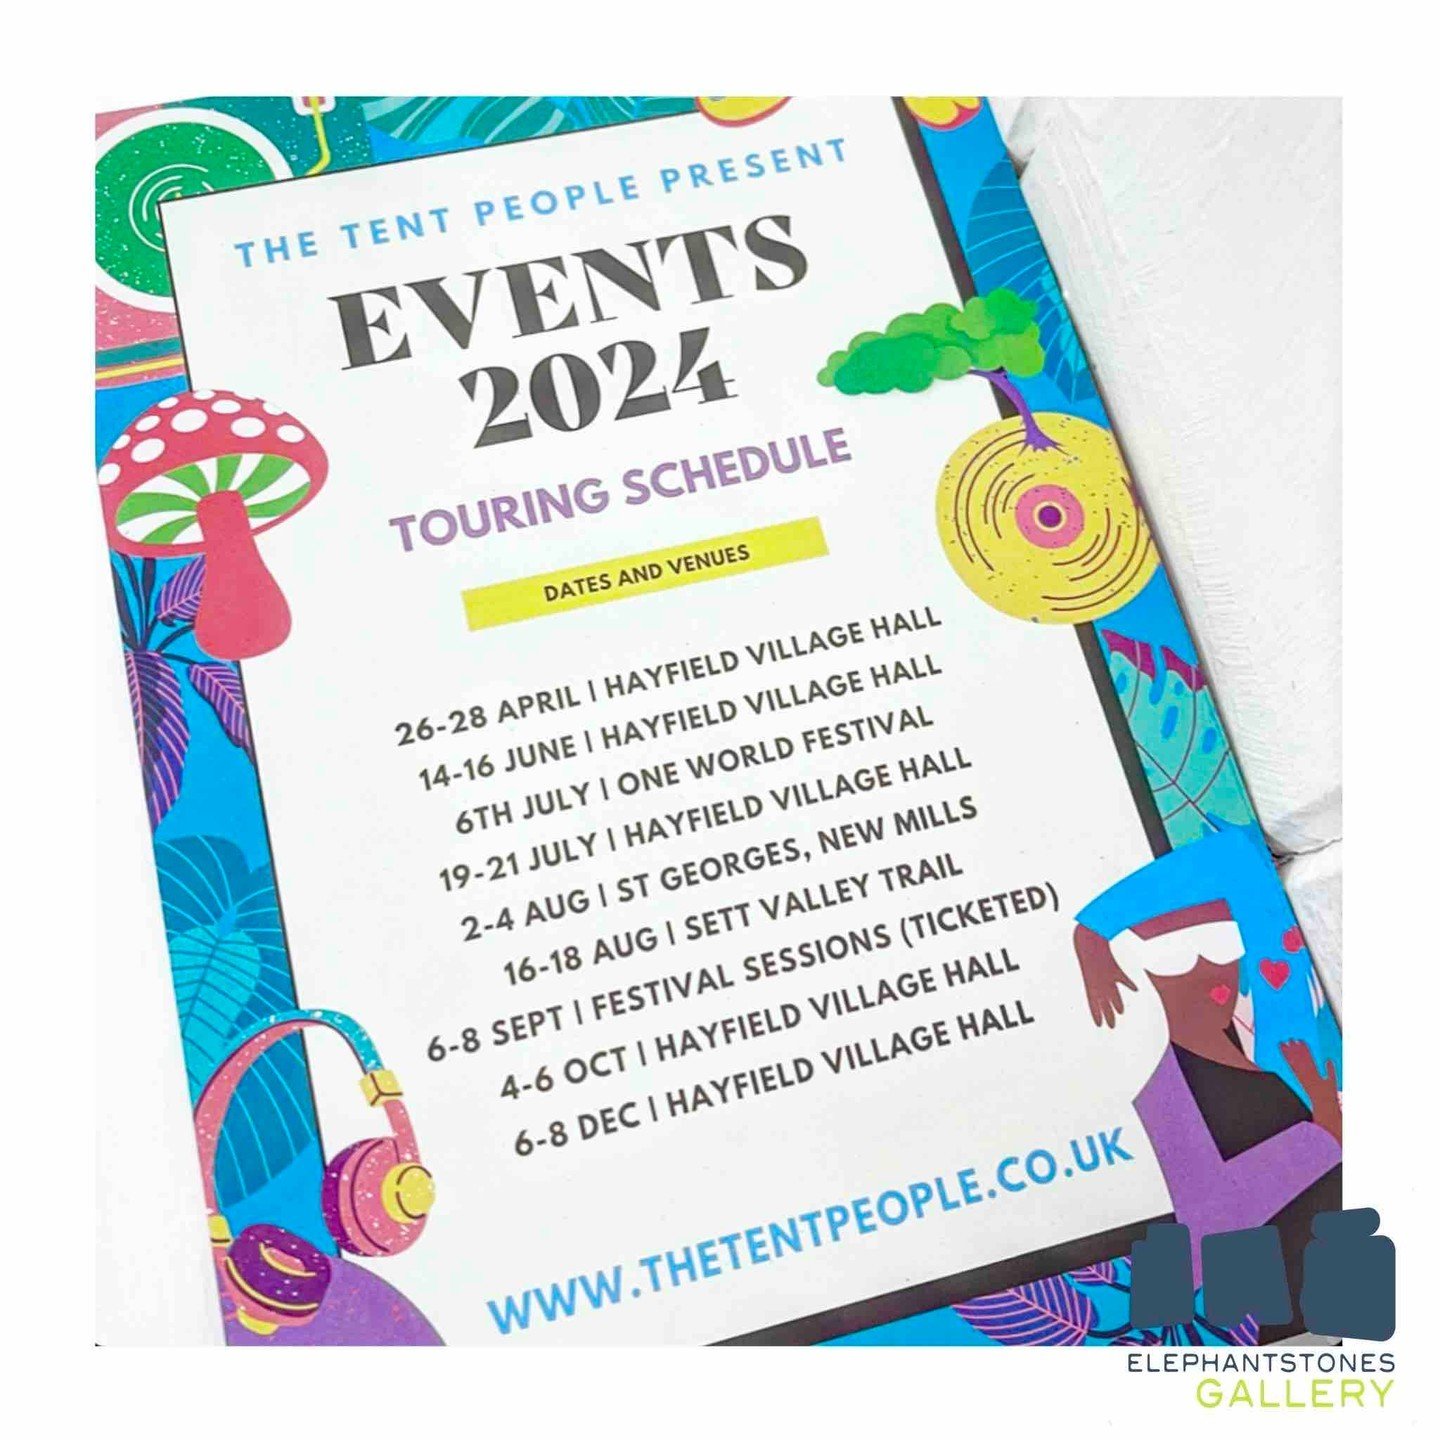 Happy Monday folks! The @thetentpeople have a great line up of events for 2024! ⛺️ We have leaflets so pop in to pick on up so you don&rsquo;t miss a thing! We are open 11am - 3pm weekdays and closed on weekends. ✨
-
See you soon! 💗
-
#art #design #